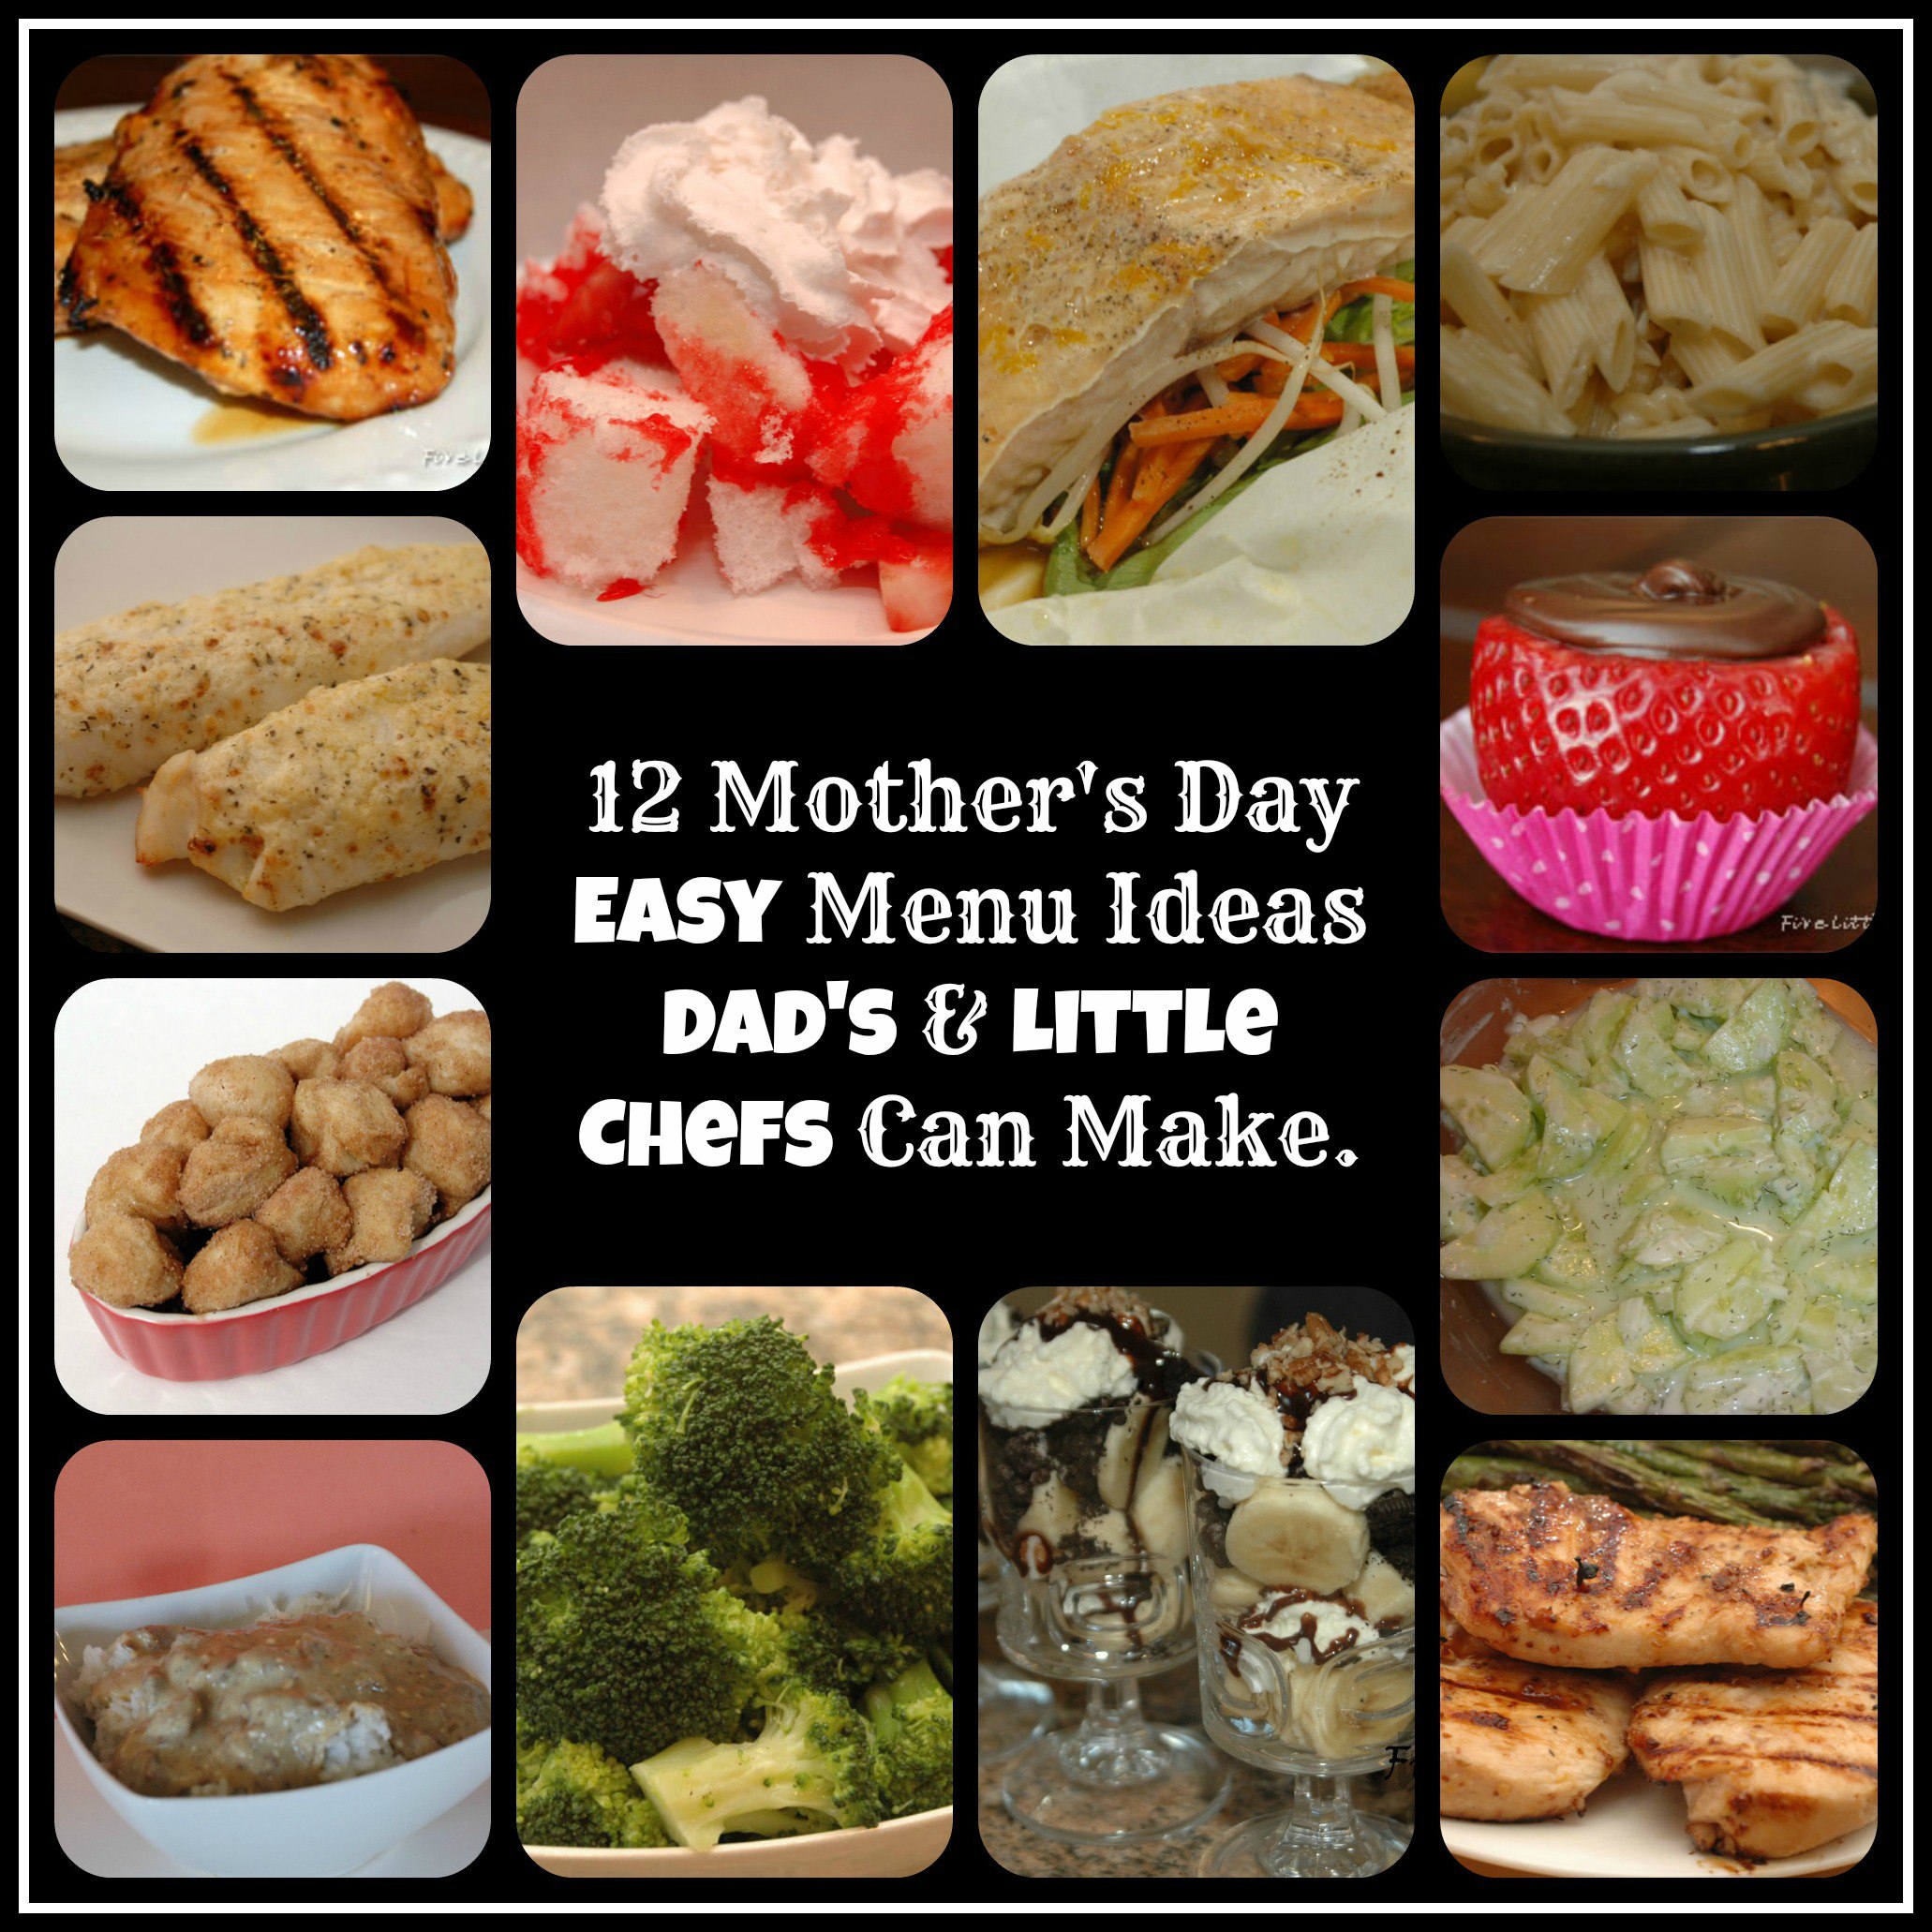 12 Mother's Day Menu Ideas Dads and little Chefs can make from fivelittlechefs.com